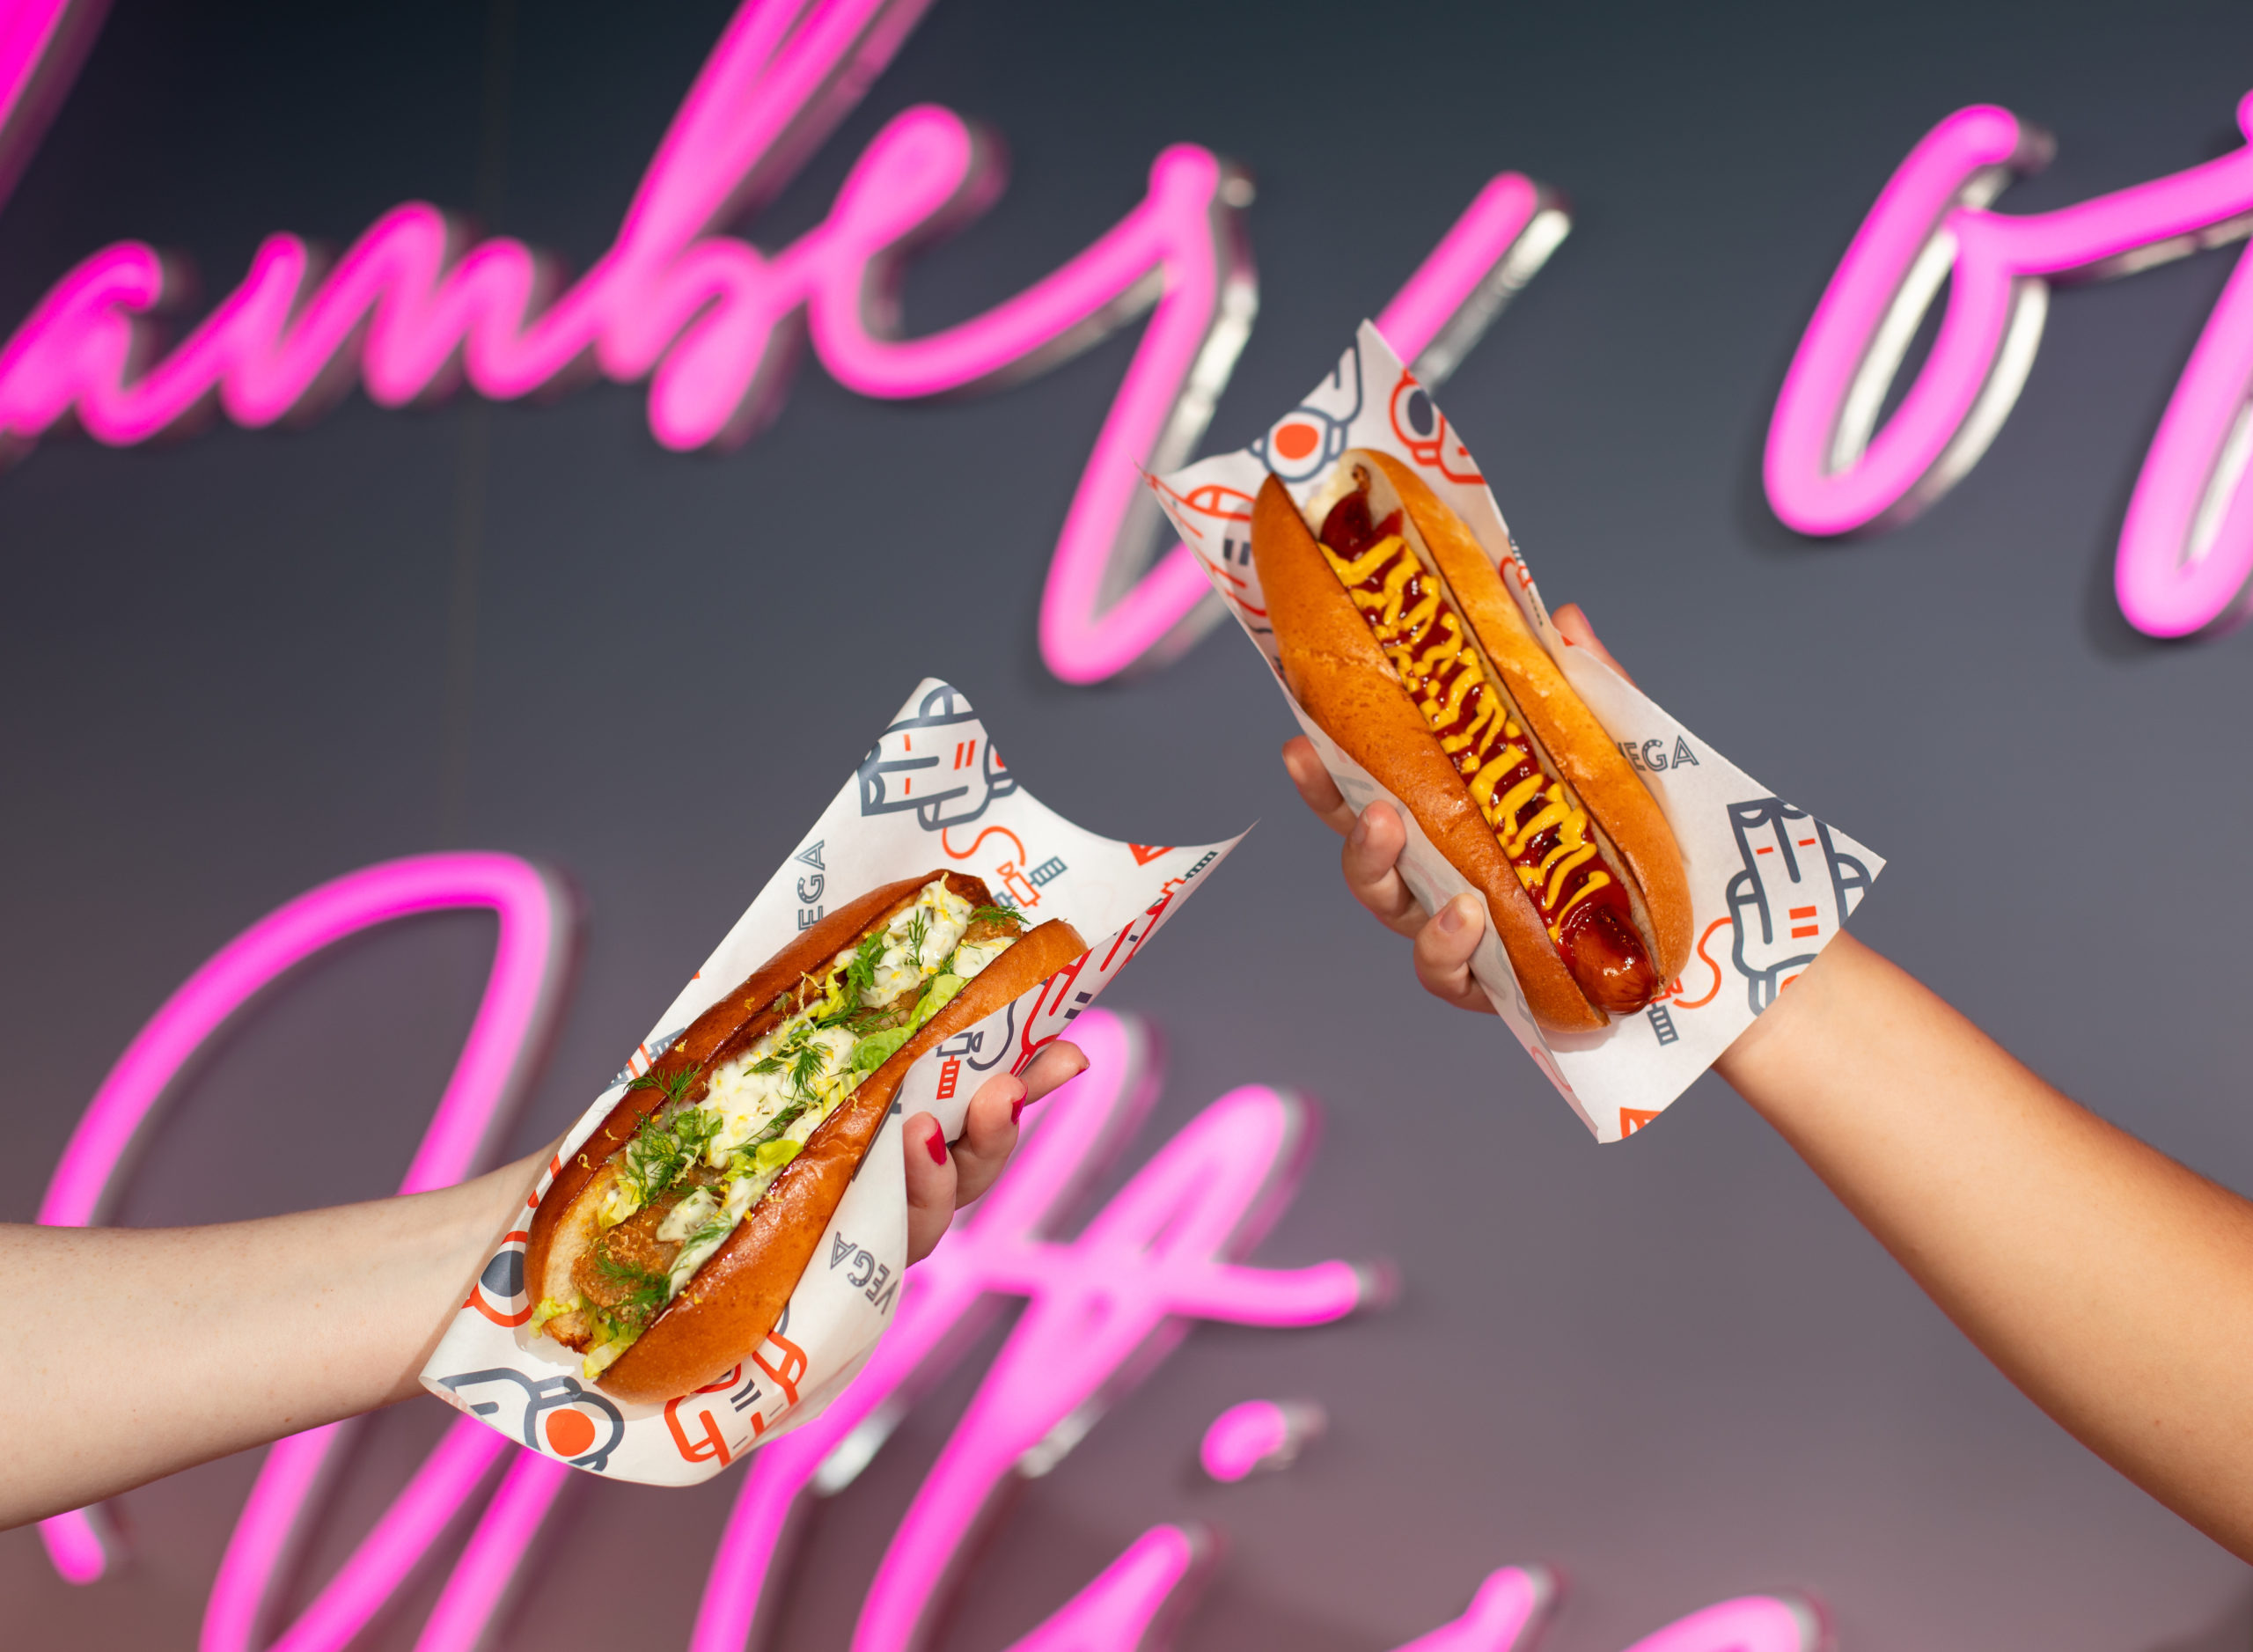 Guests holding two VEGA hotdogs in the air